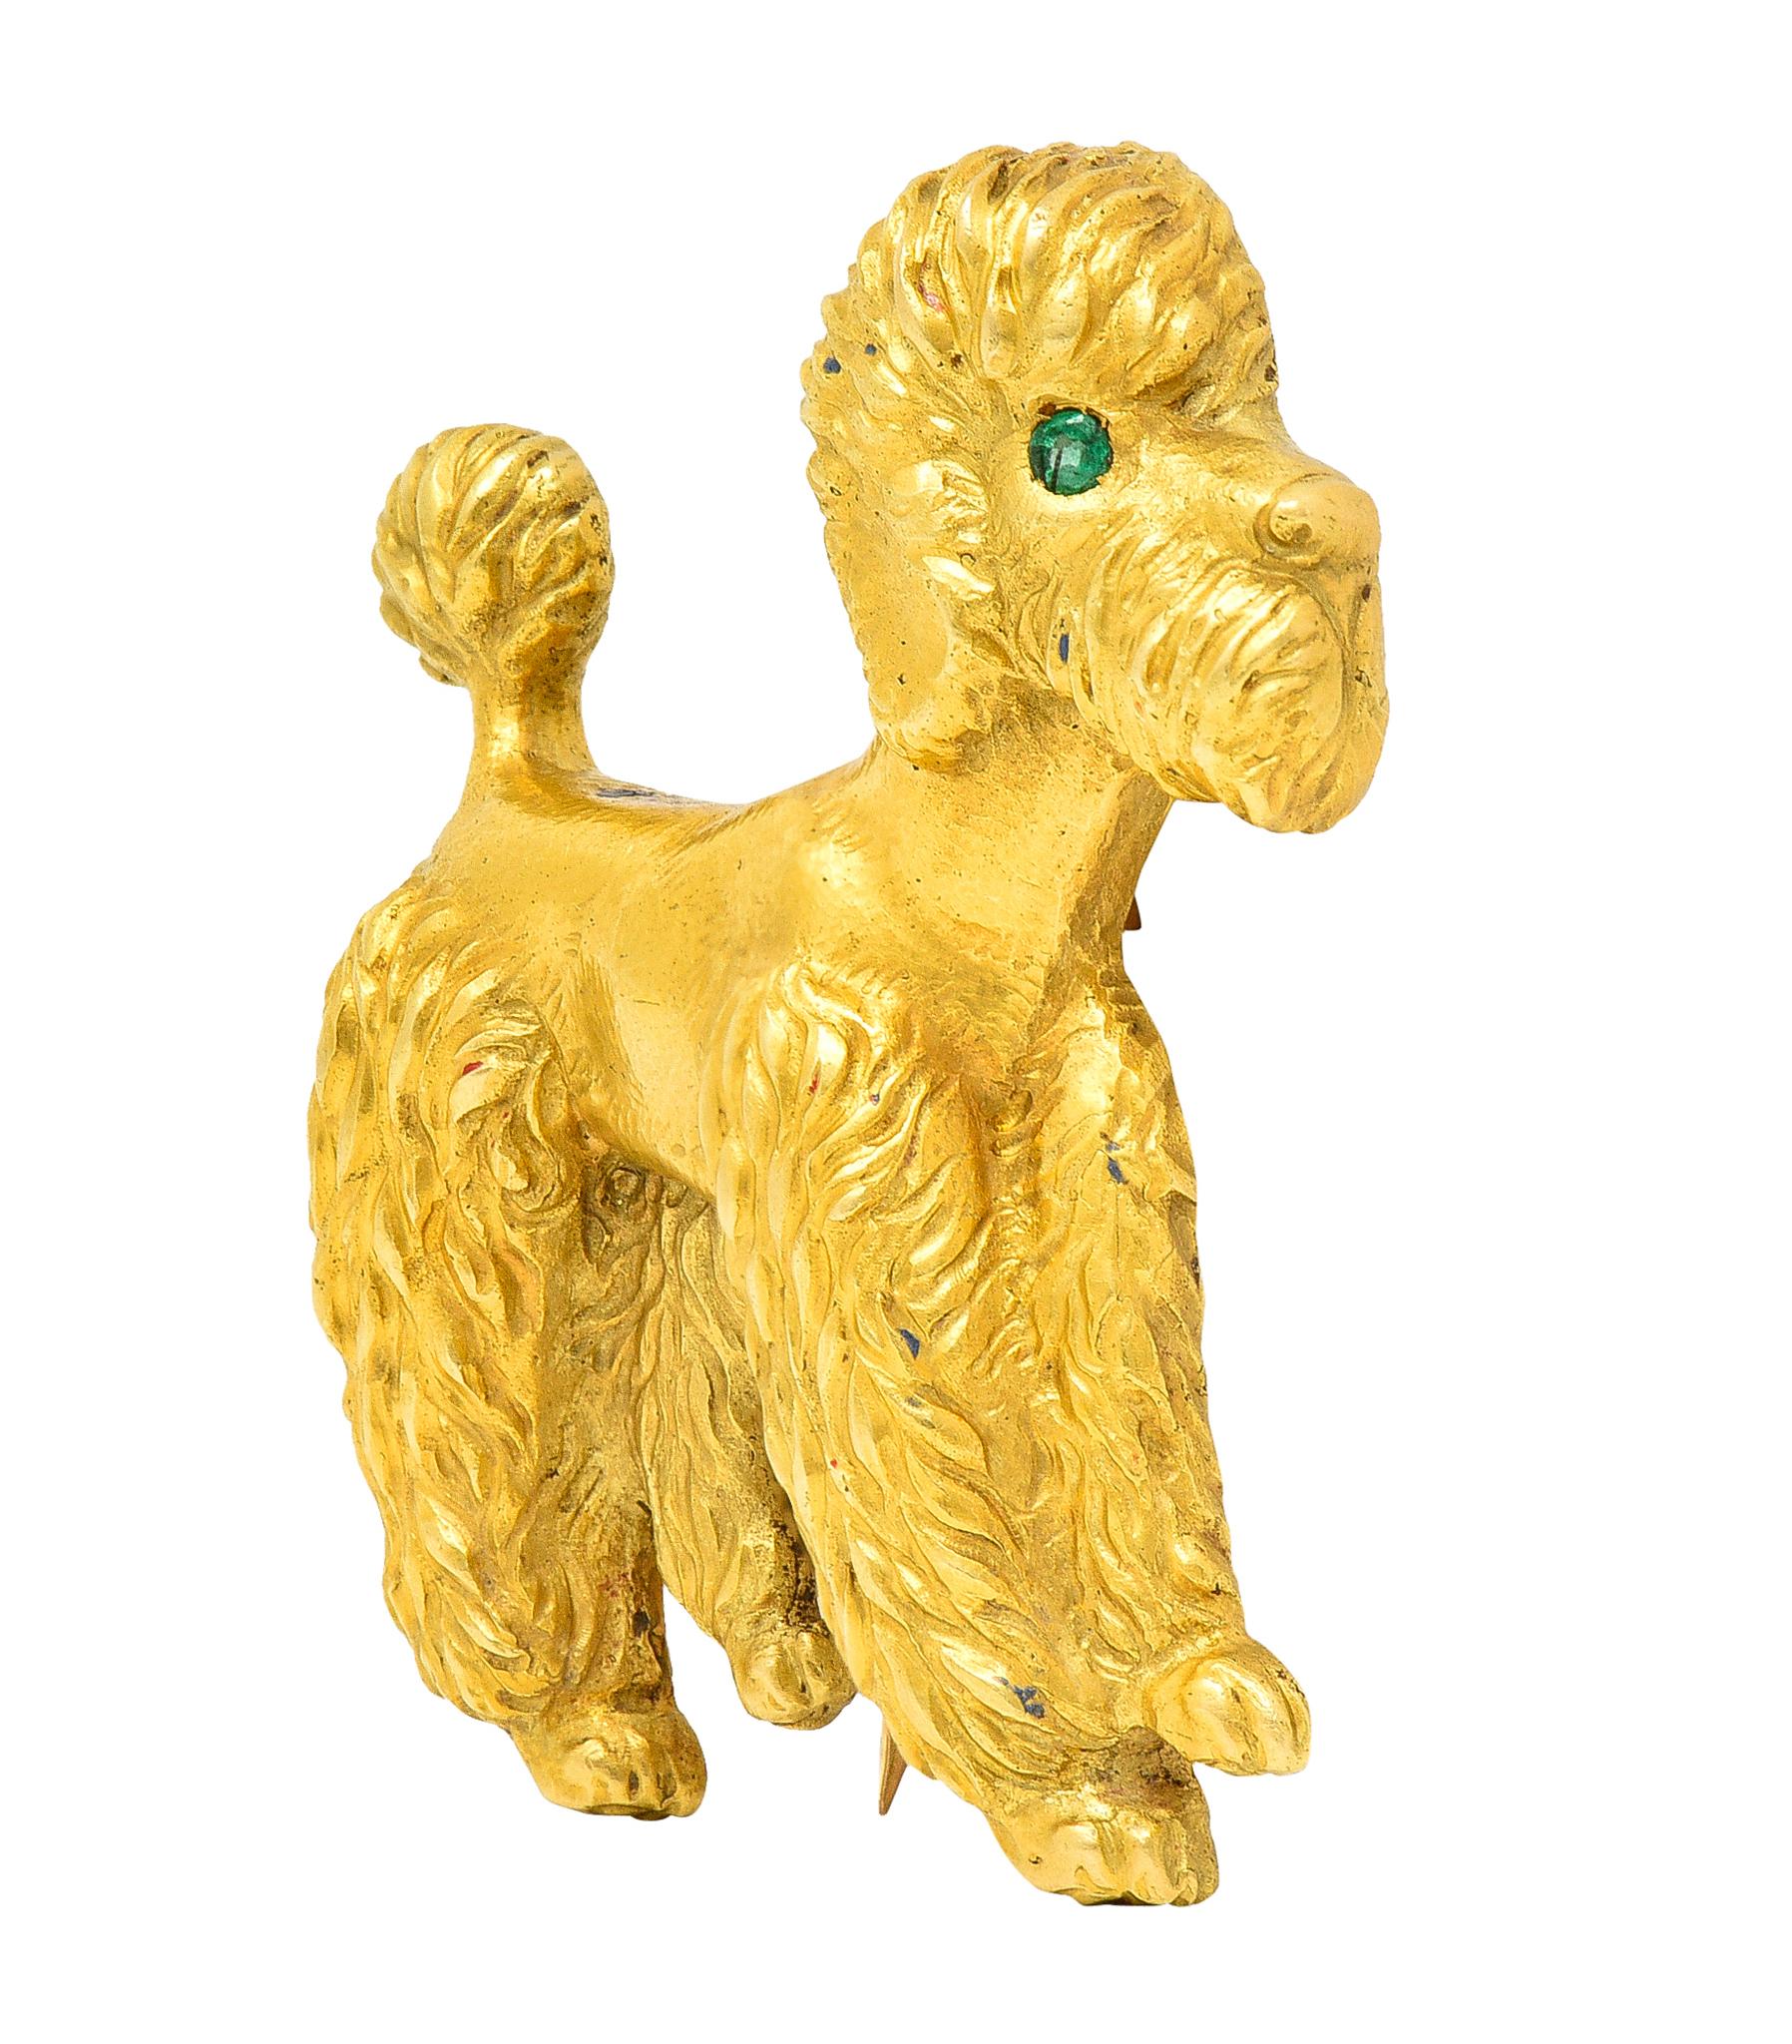 Designed as a highly rendered standing poodle with deeply textured fur
Accented by a flush set round cut emerald eye
Transparent bright medium green in color
With matte finish throughout
Completed by hinged double pin stem
Stamped 18KTS for 18 karat